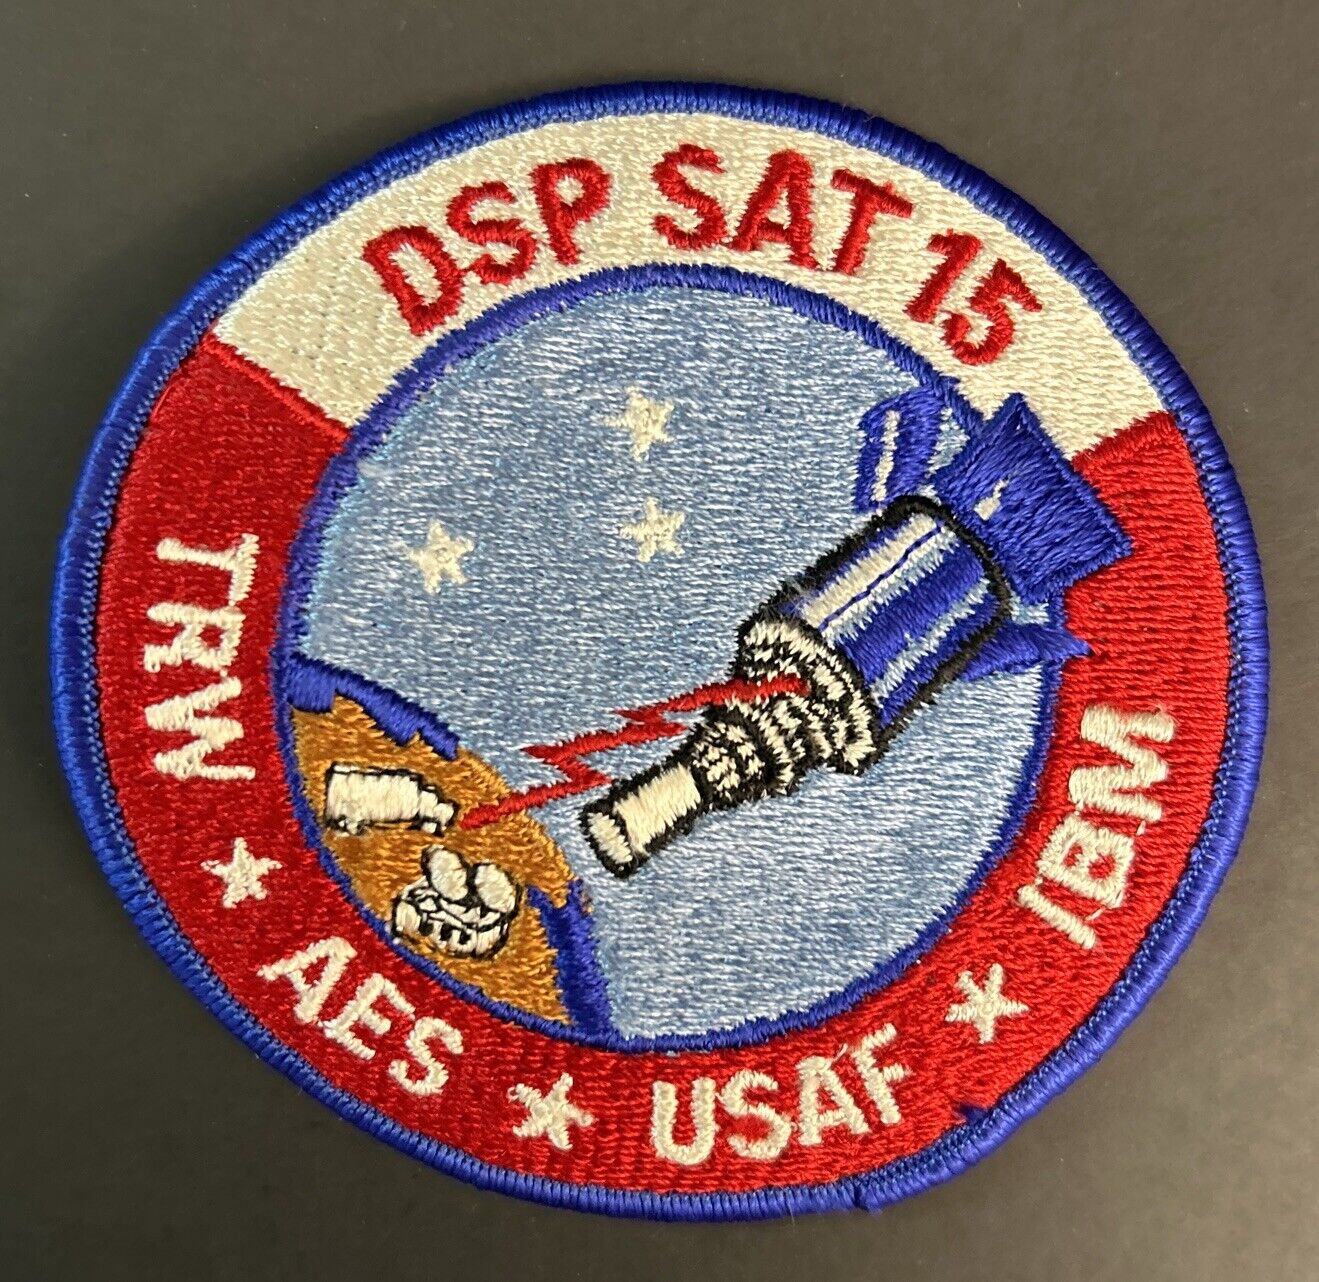 RARE Space Shuttle Defense Systems DSP SAT 15 4” Patch TRW AES USAF IBM NASA